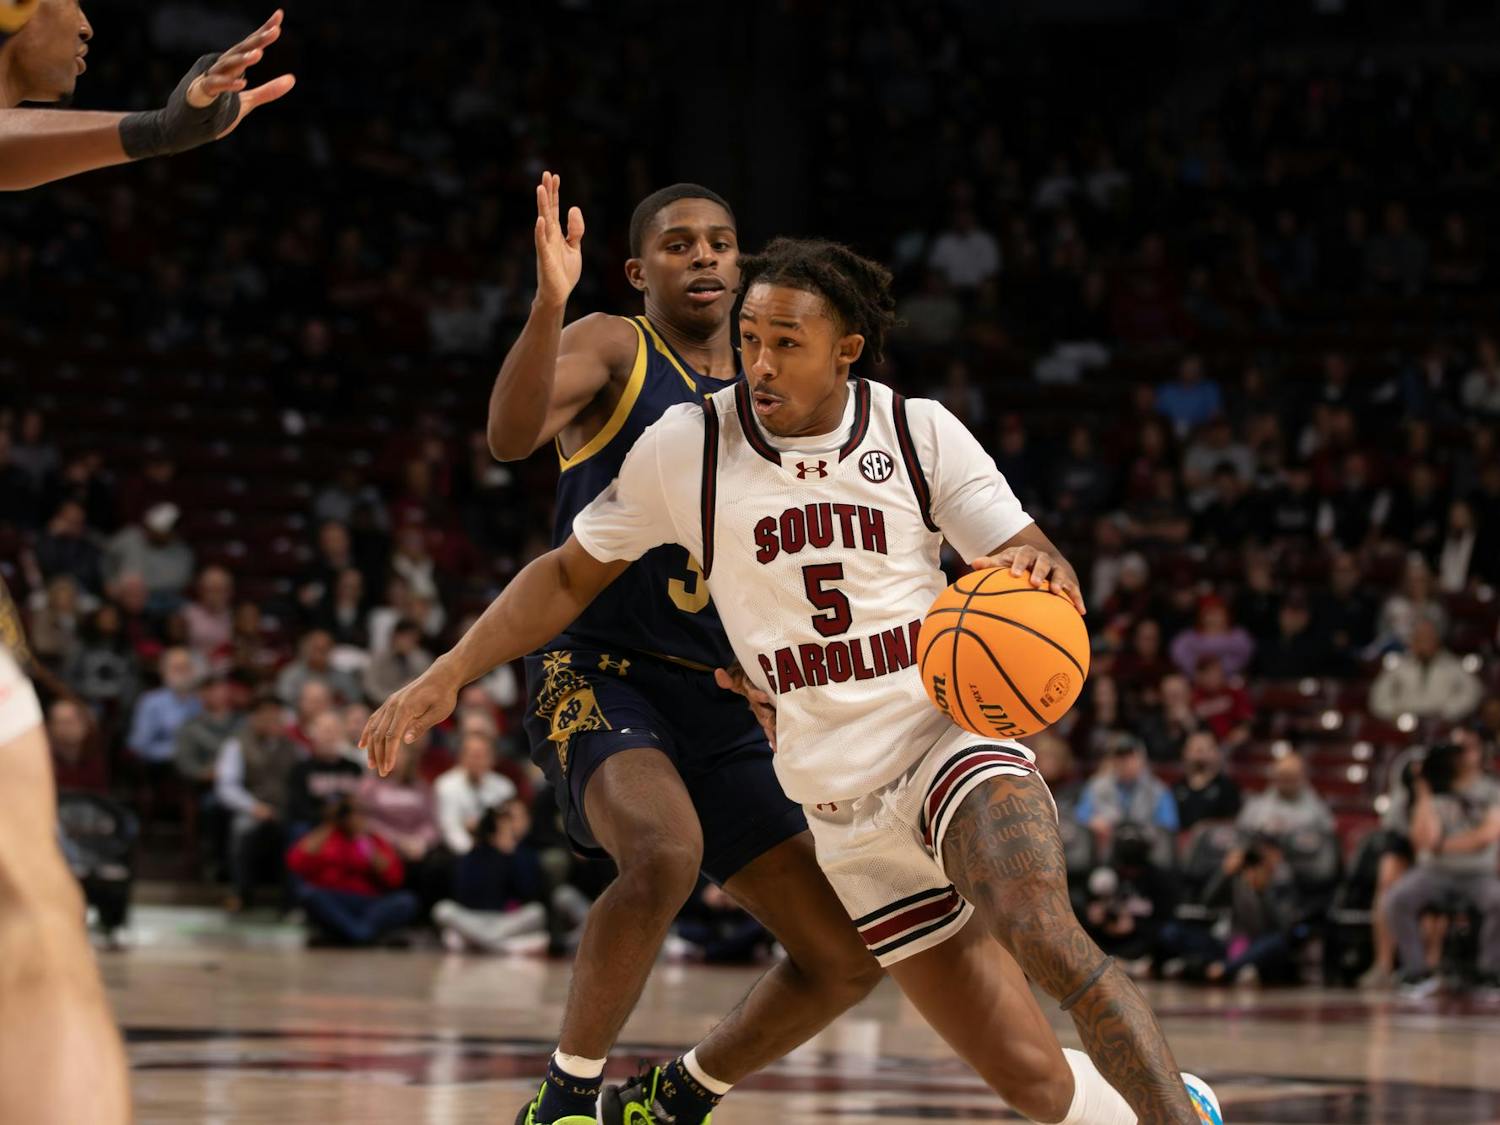 Junior guard Meechie Johnson drives to the basket during his career-best scoring game against Notre Dame on Nov. 28, 2023. Johnson ended the game with a total of 29 points, fueling the Gamecocks' 65-53 win.